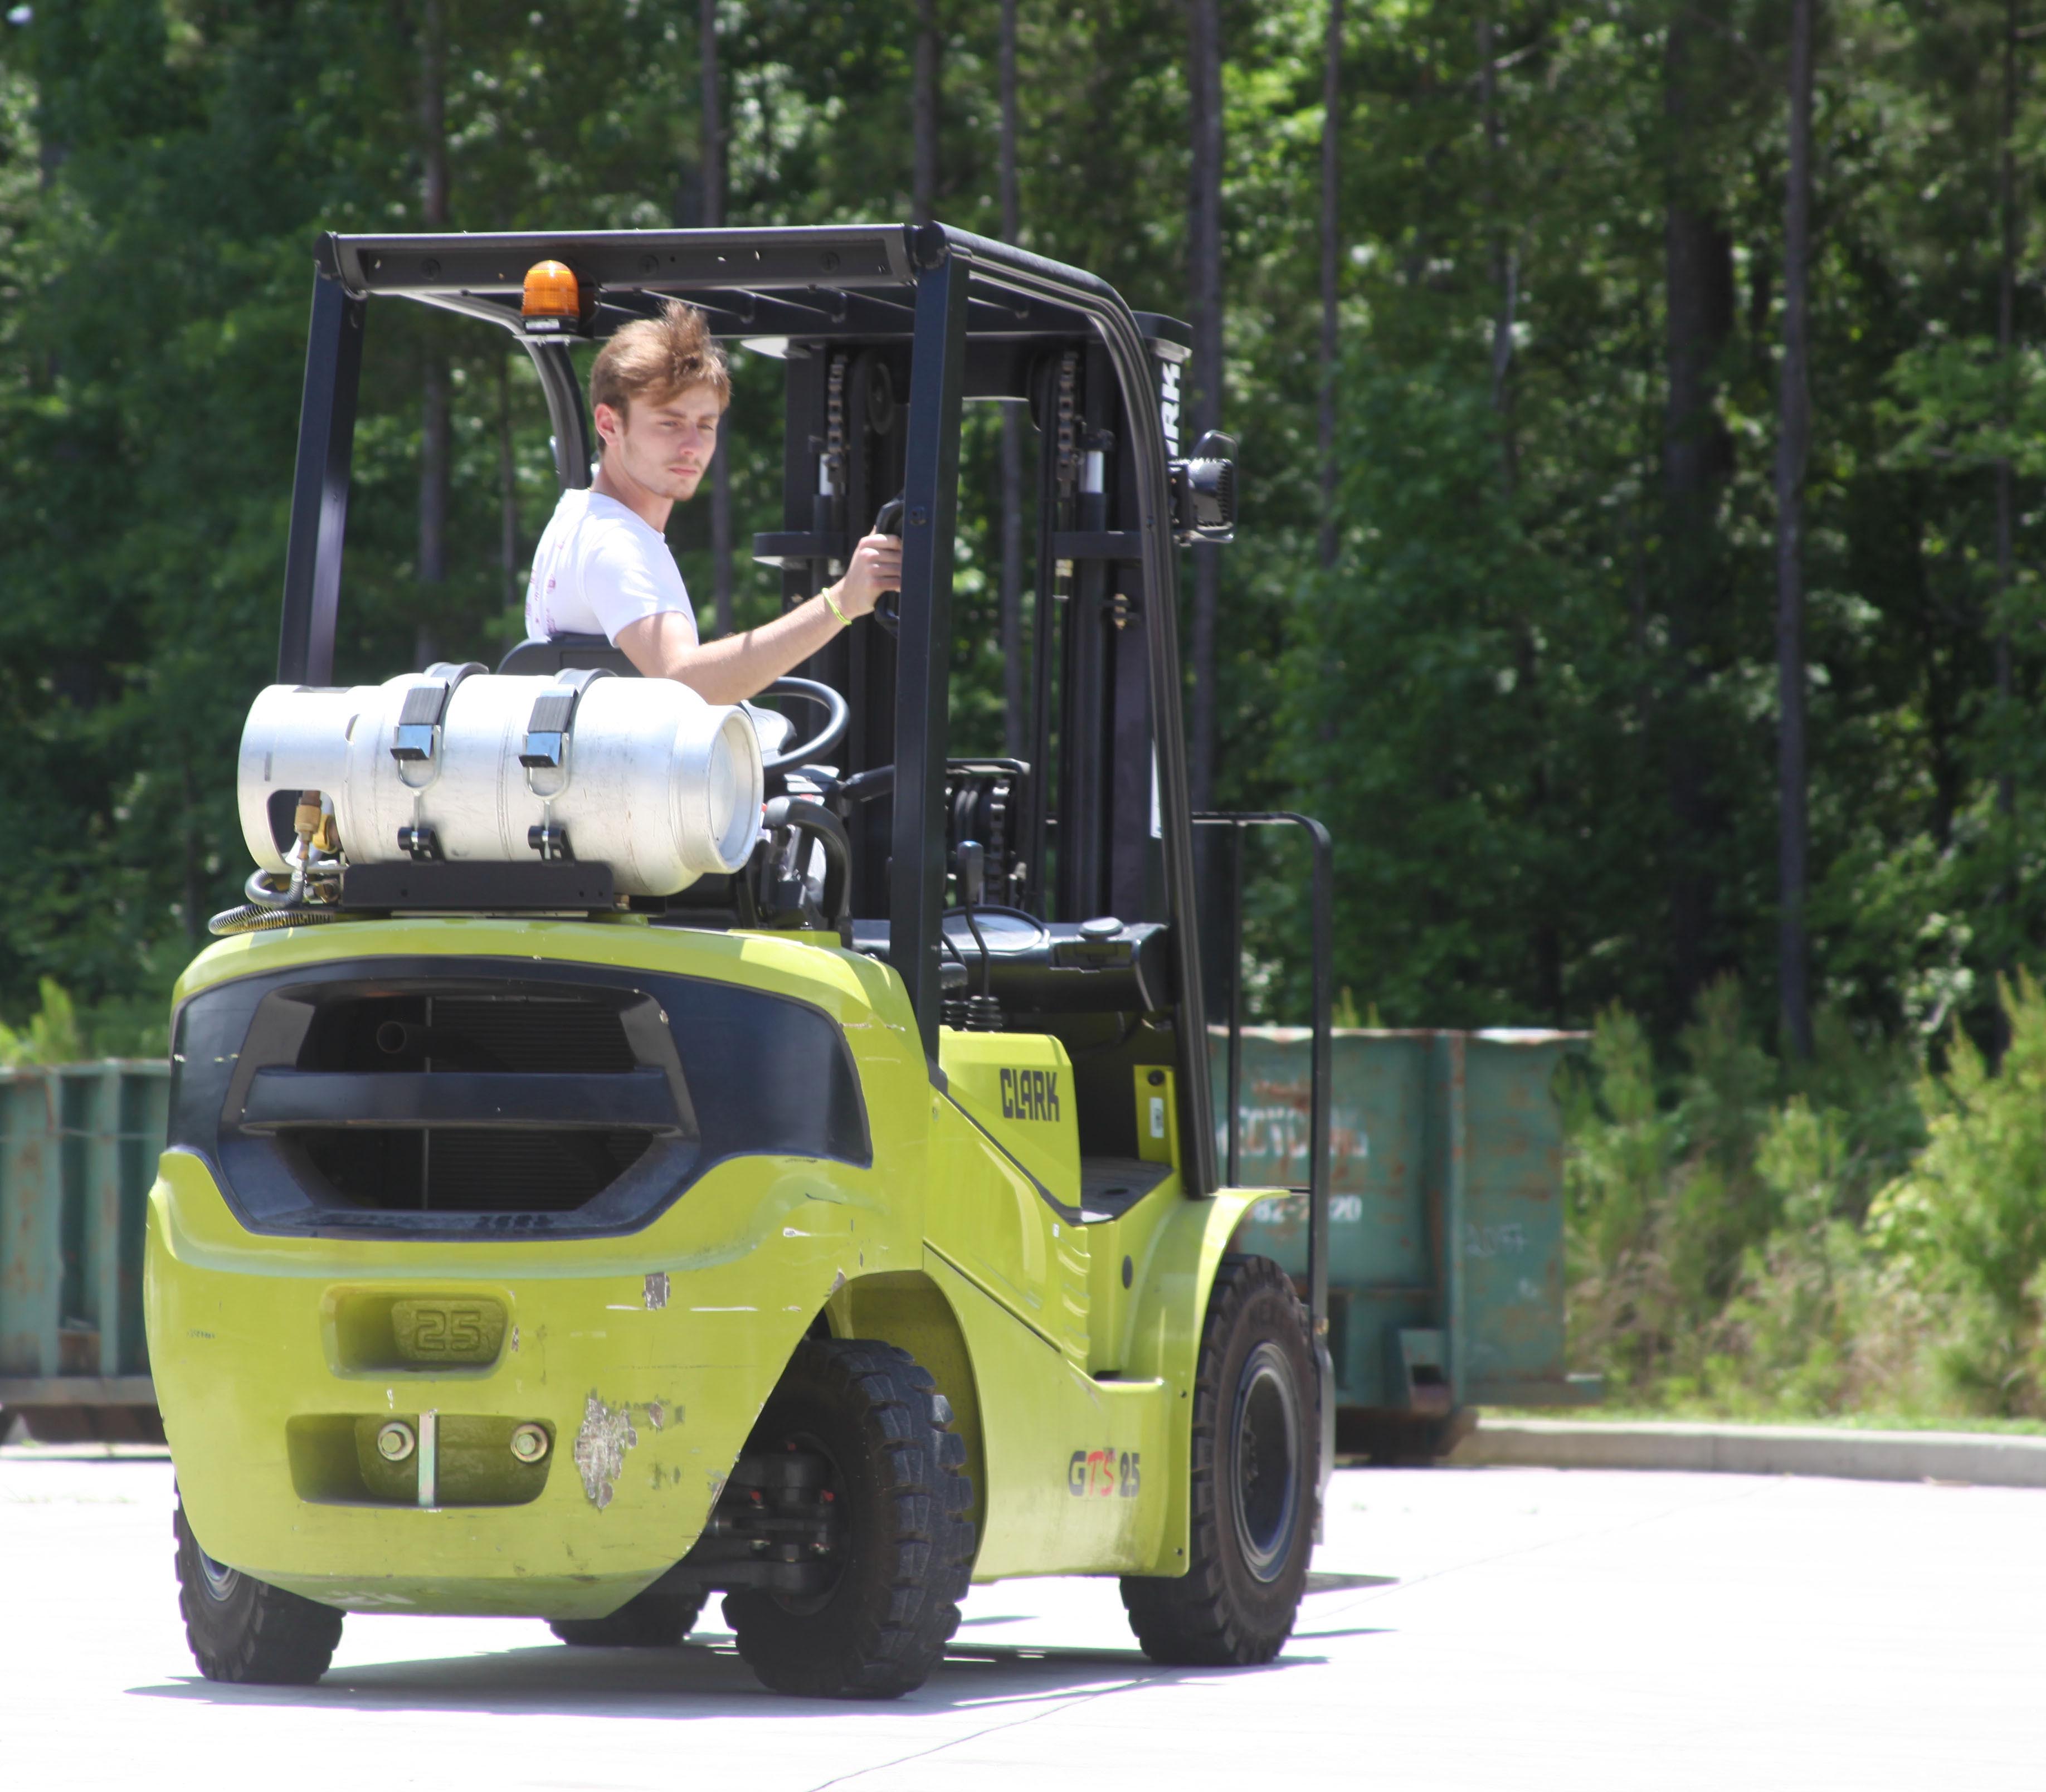 Tyler Frazier practices backing up. Students were certified to operate the forklift after successfully completing the driving test.